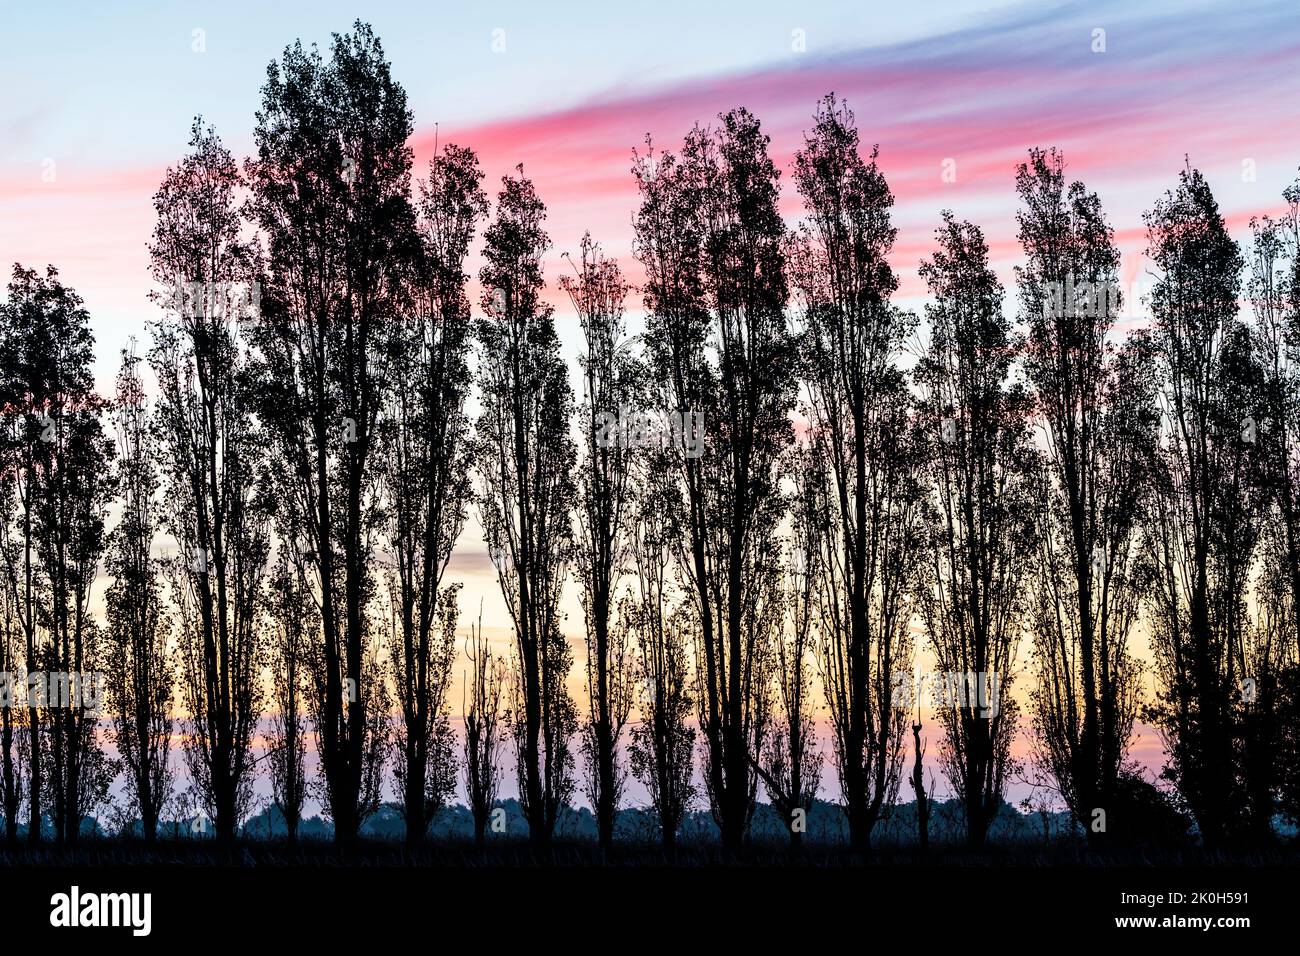 The dawn sky with on the horizon a row of silhouetted poplar trees in the autumn. Sky behind the trees is yellow and orange, turning blue above the trees with pink purple clouds Stock Photo